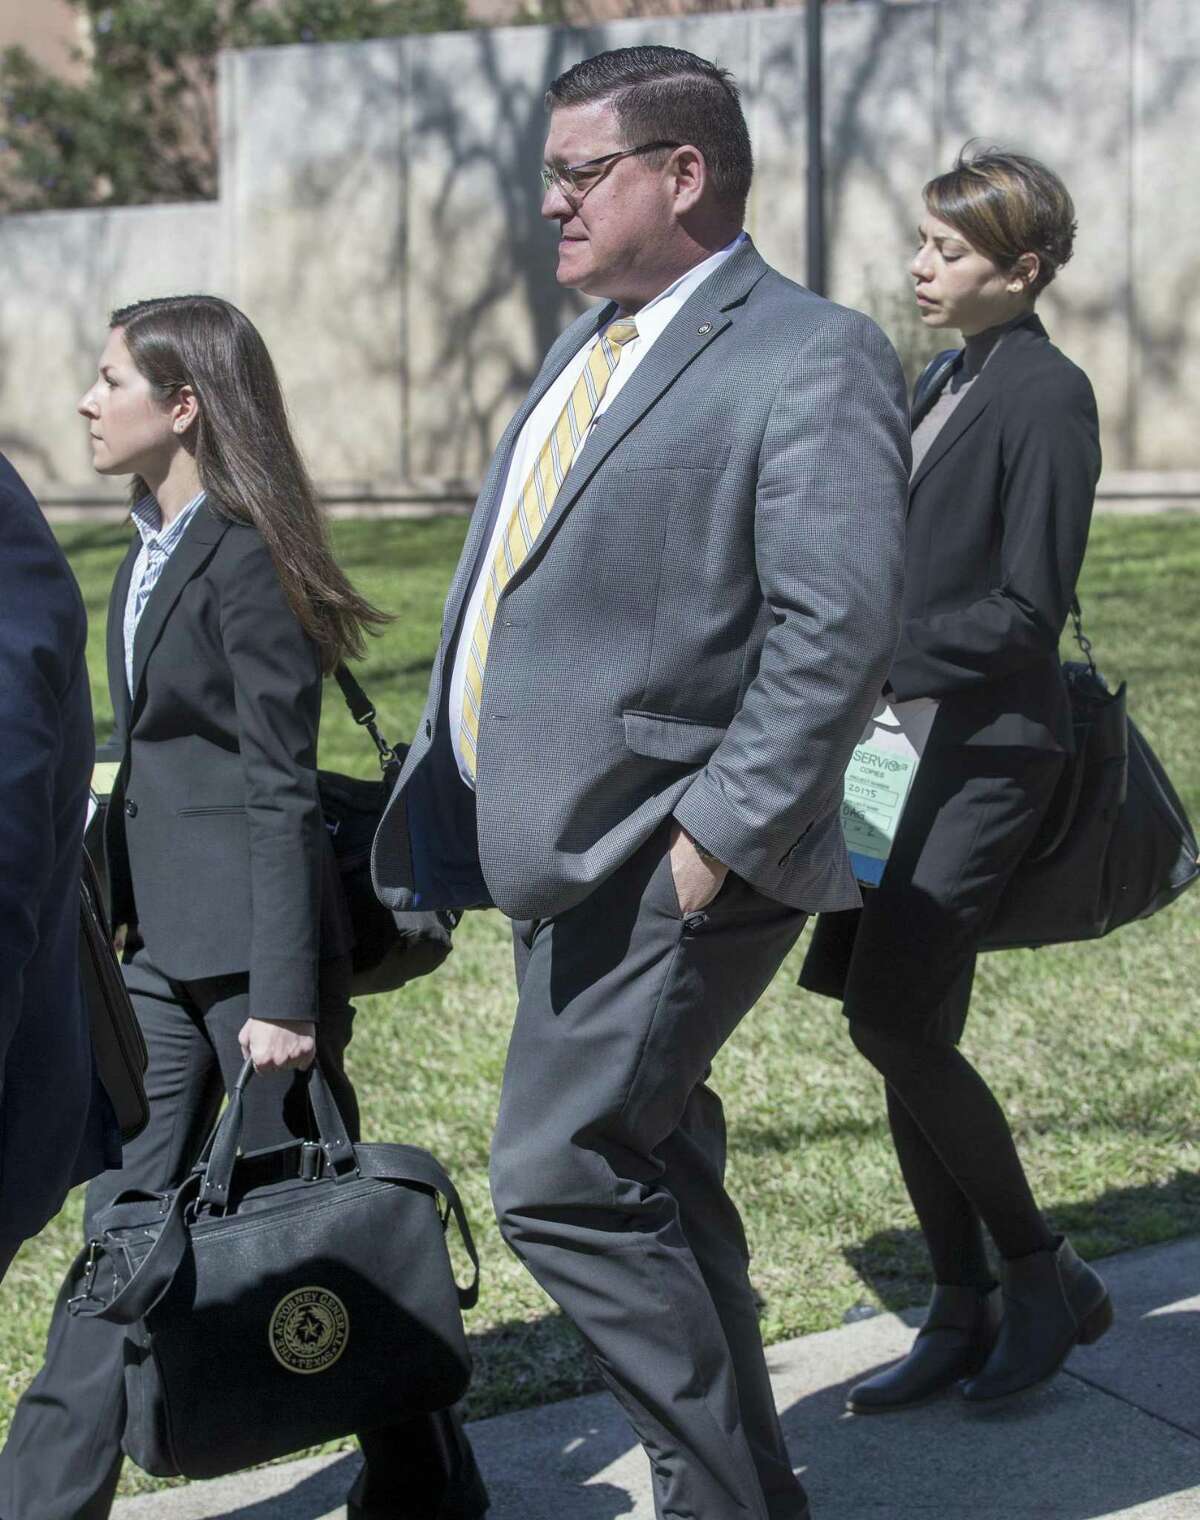 Keith Ingram, center, director of elections at the Texas Secretary of State’s office, leaves the John H. Wood Federal Courthouse last week after testifying during a hearing about the state’s initiative to purge tens of thousands of Texans from voter rolls who officials claim are not U.S. citizens. The League of United Latin American Citizens sued the state over the plan.